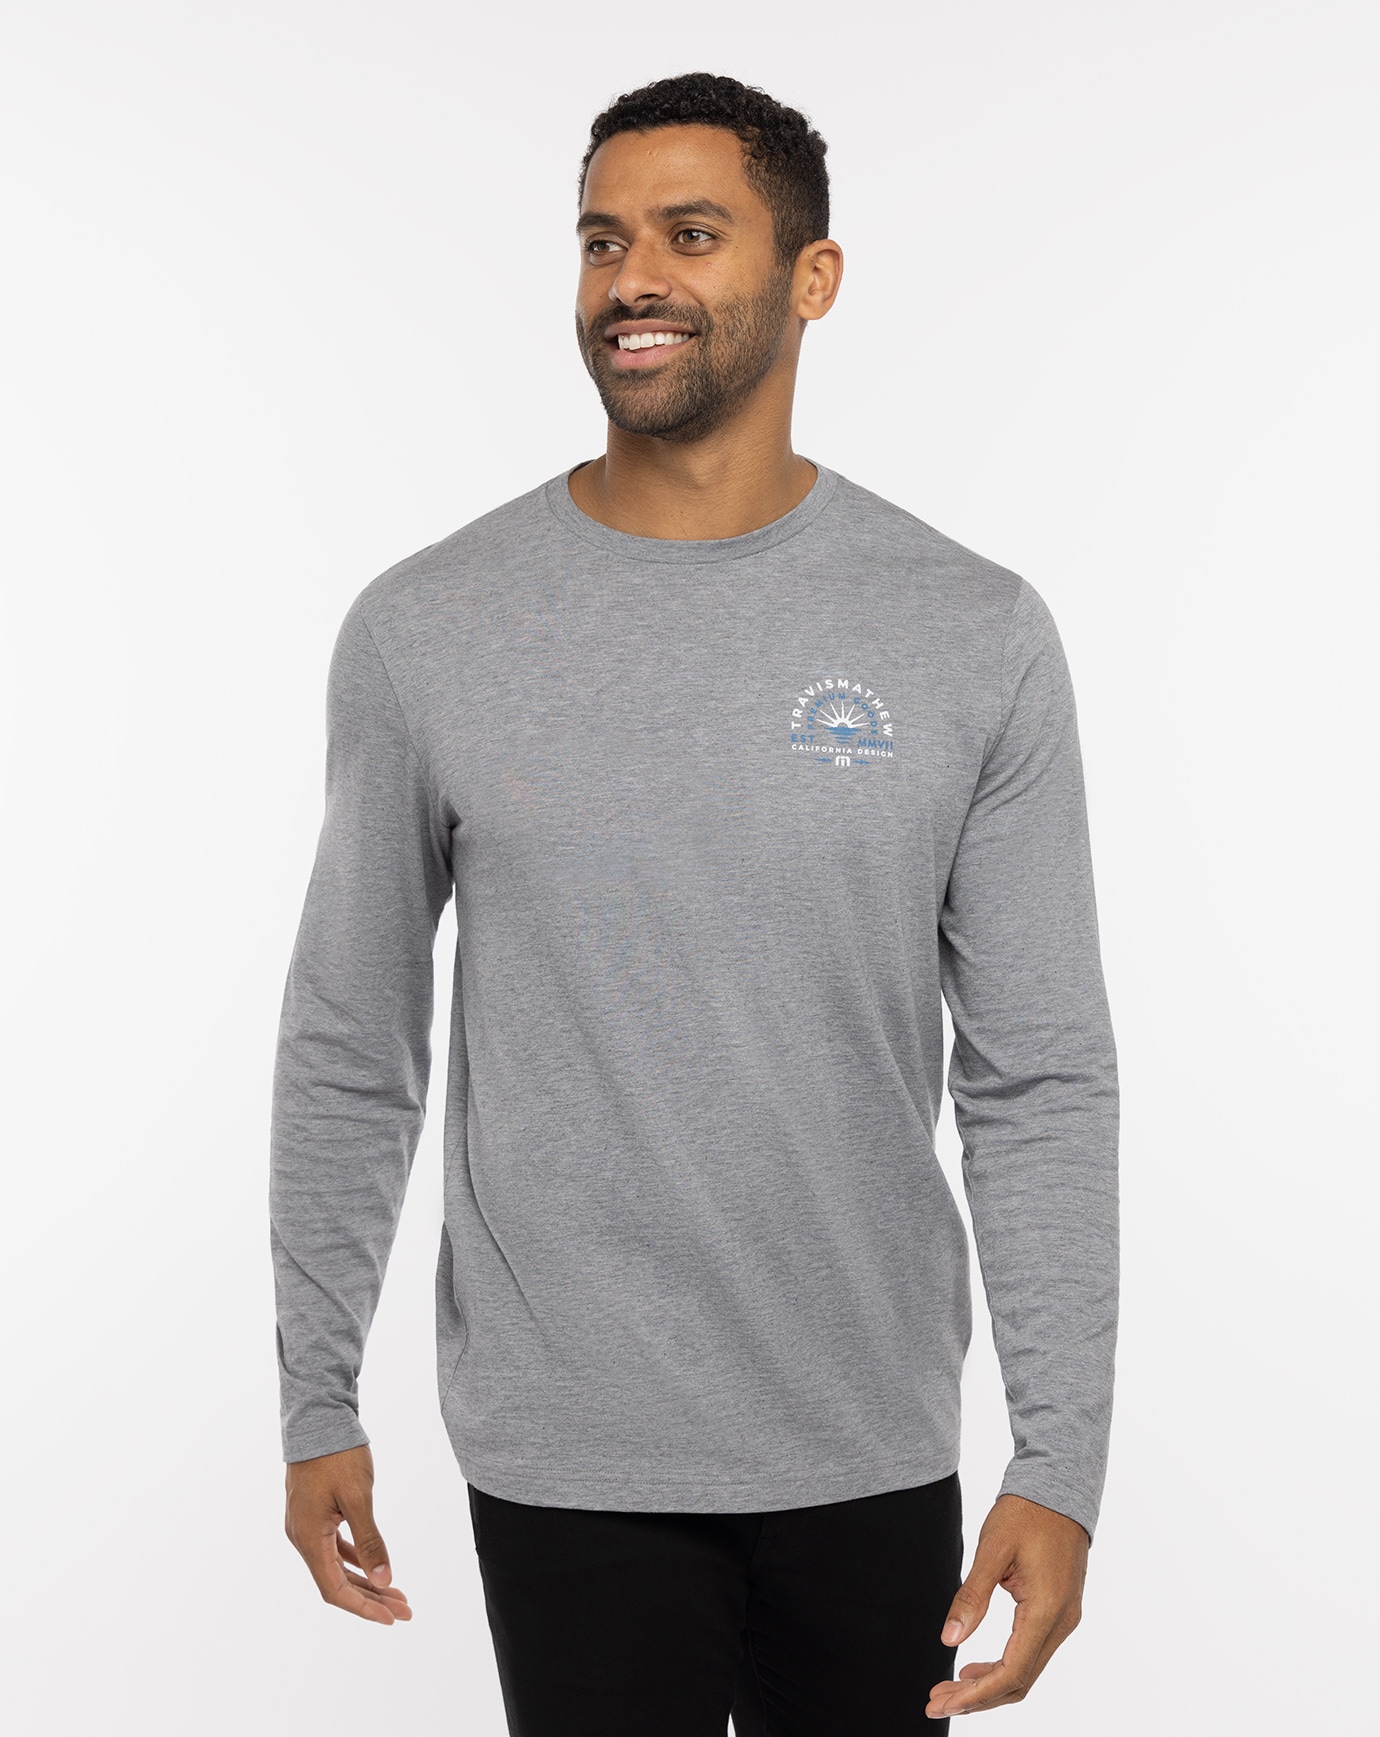 Related Product - EXTRA SHOT LONG SLEEVE TEE